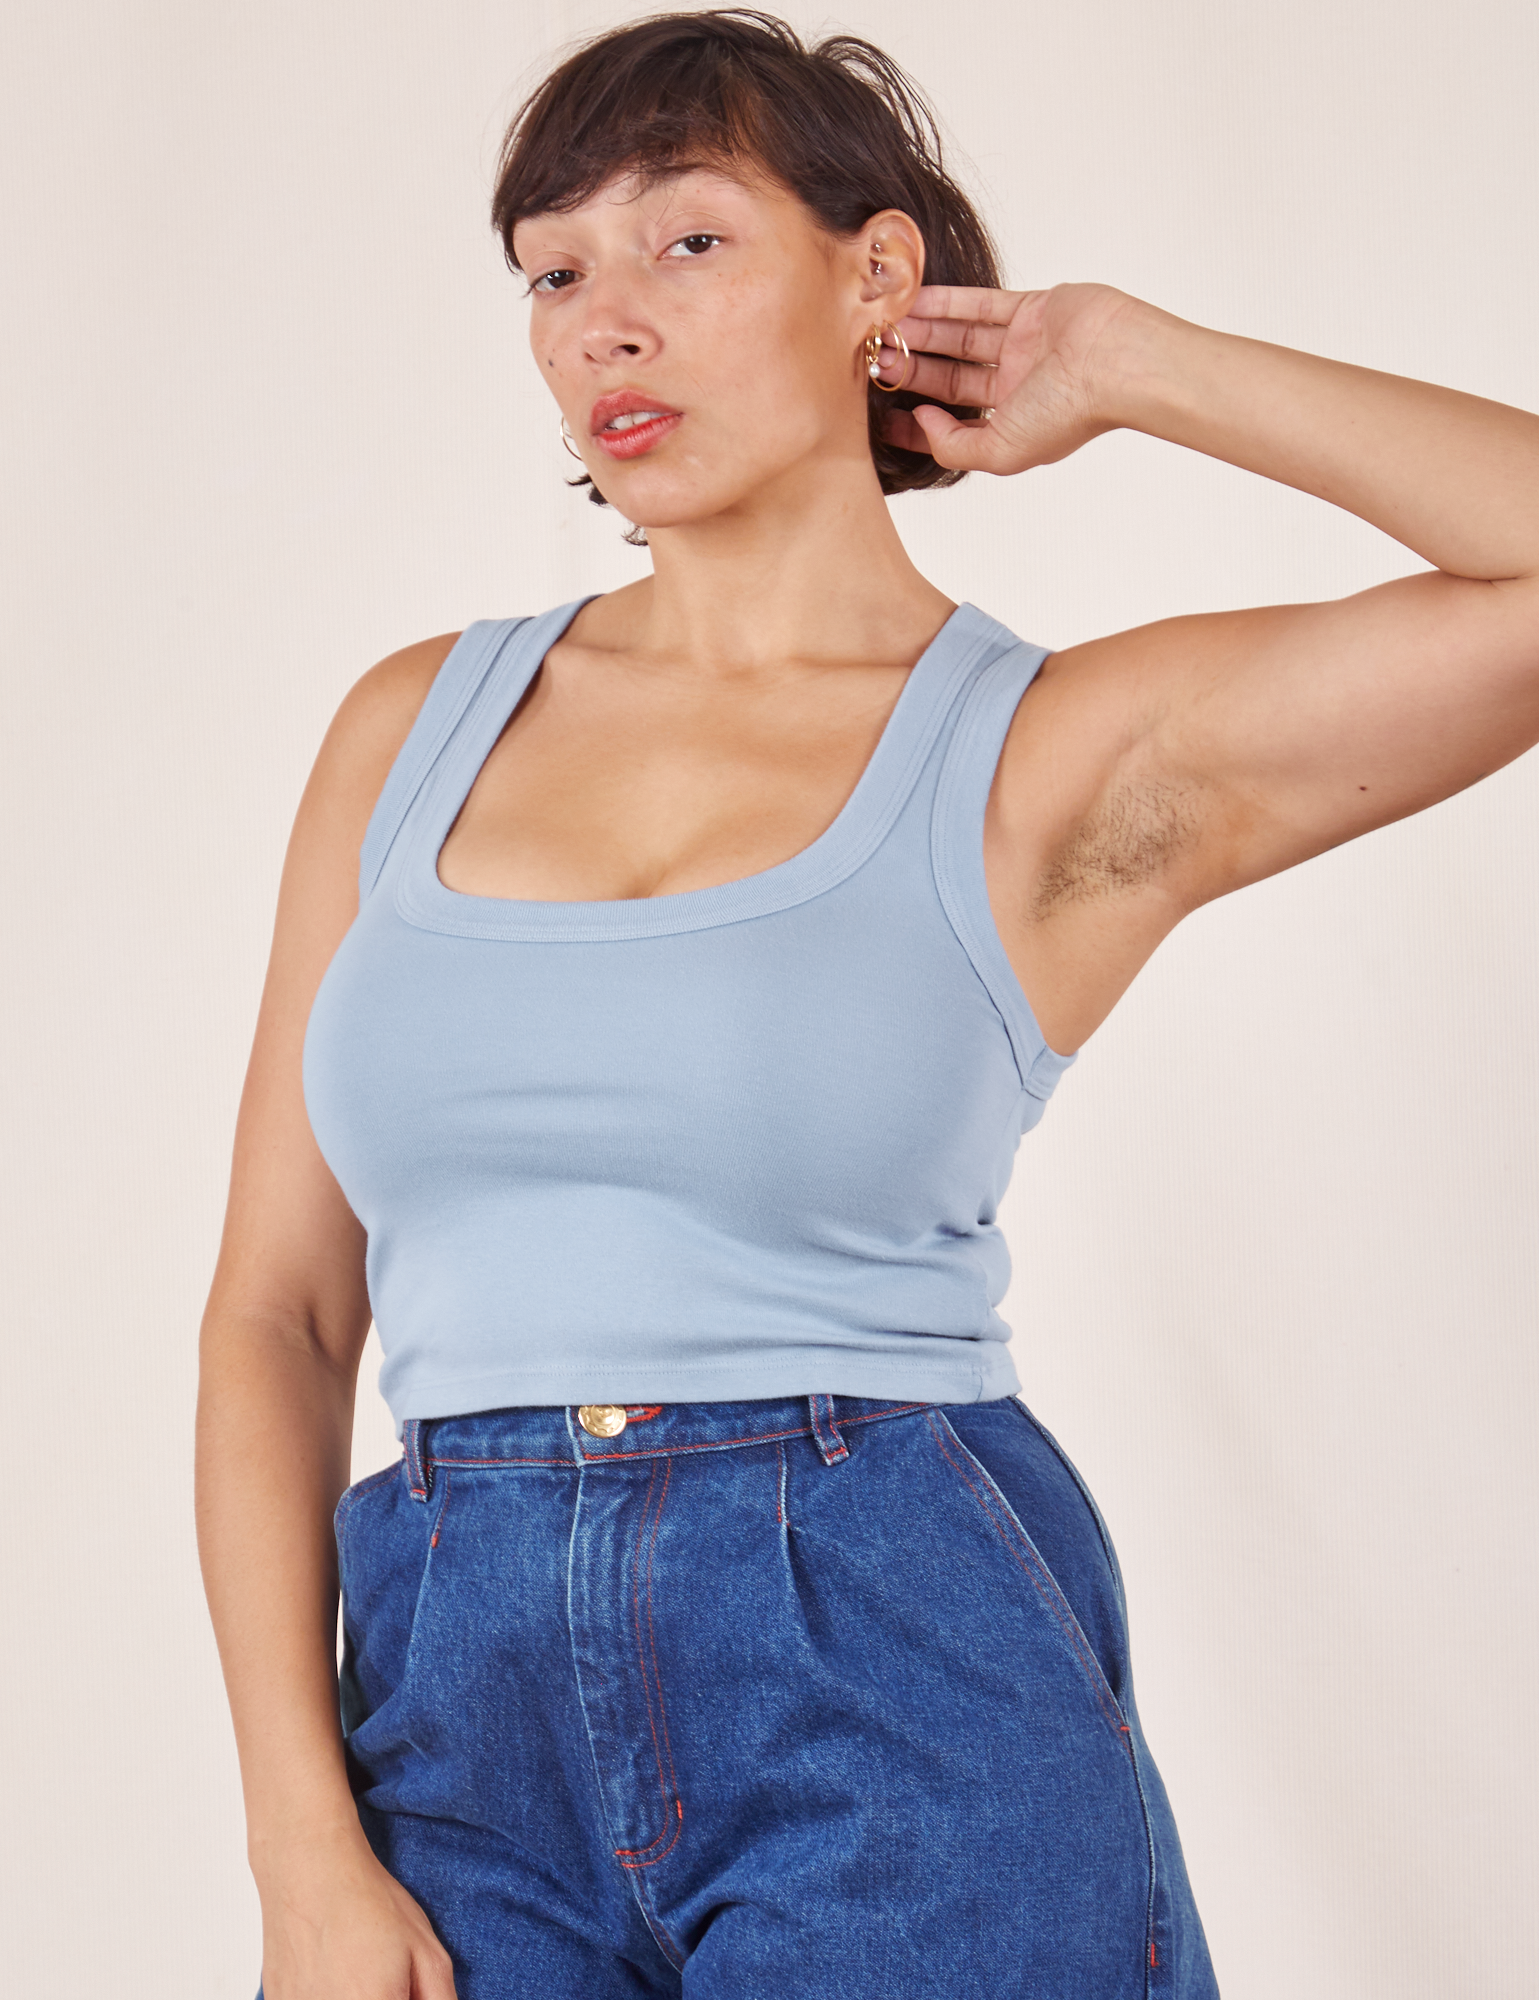 Tiara is 5&#39;4&#39; and wearing XS Cropped Tank Top in Periwinkle